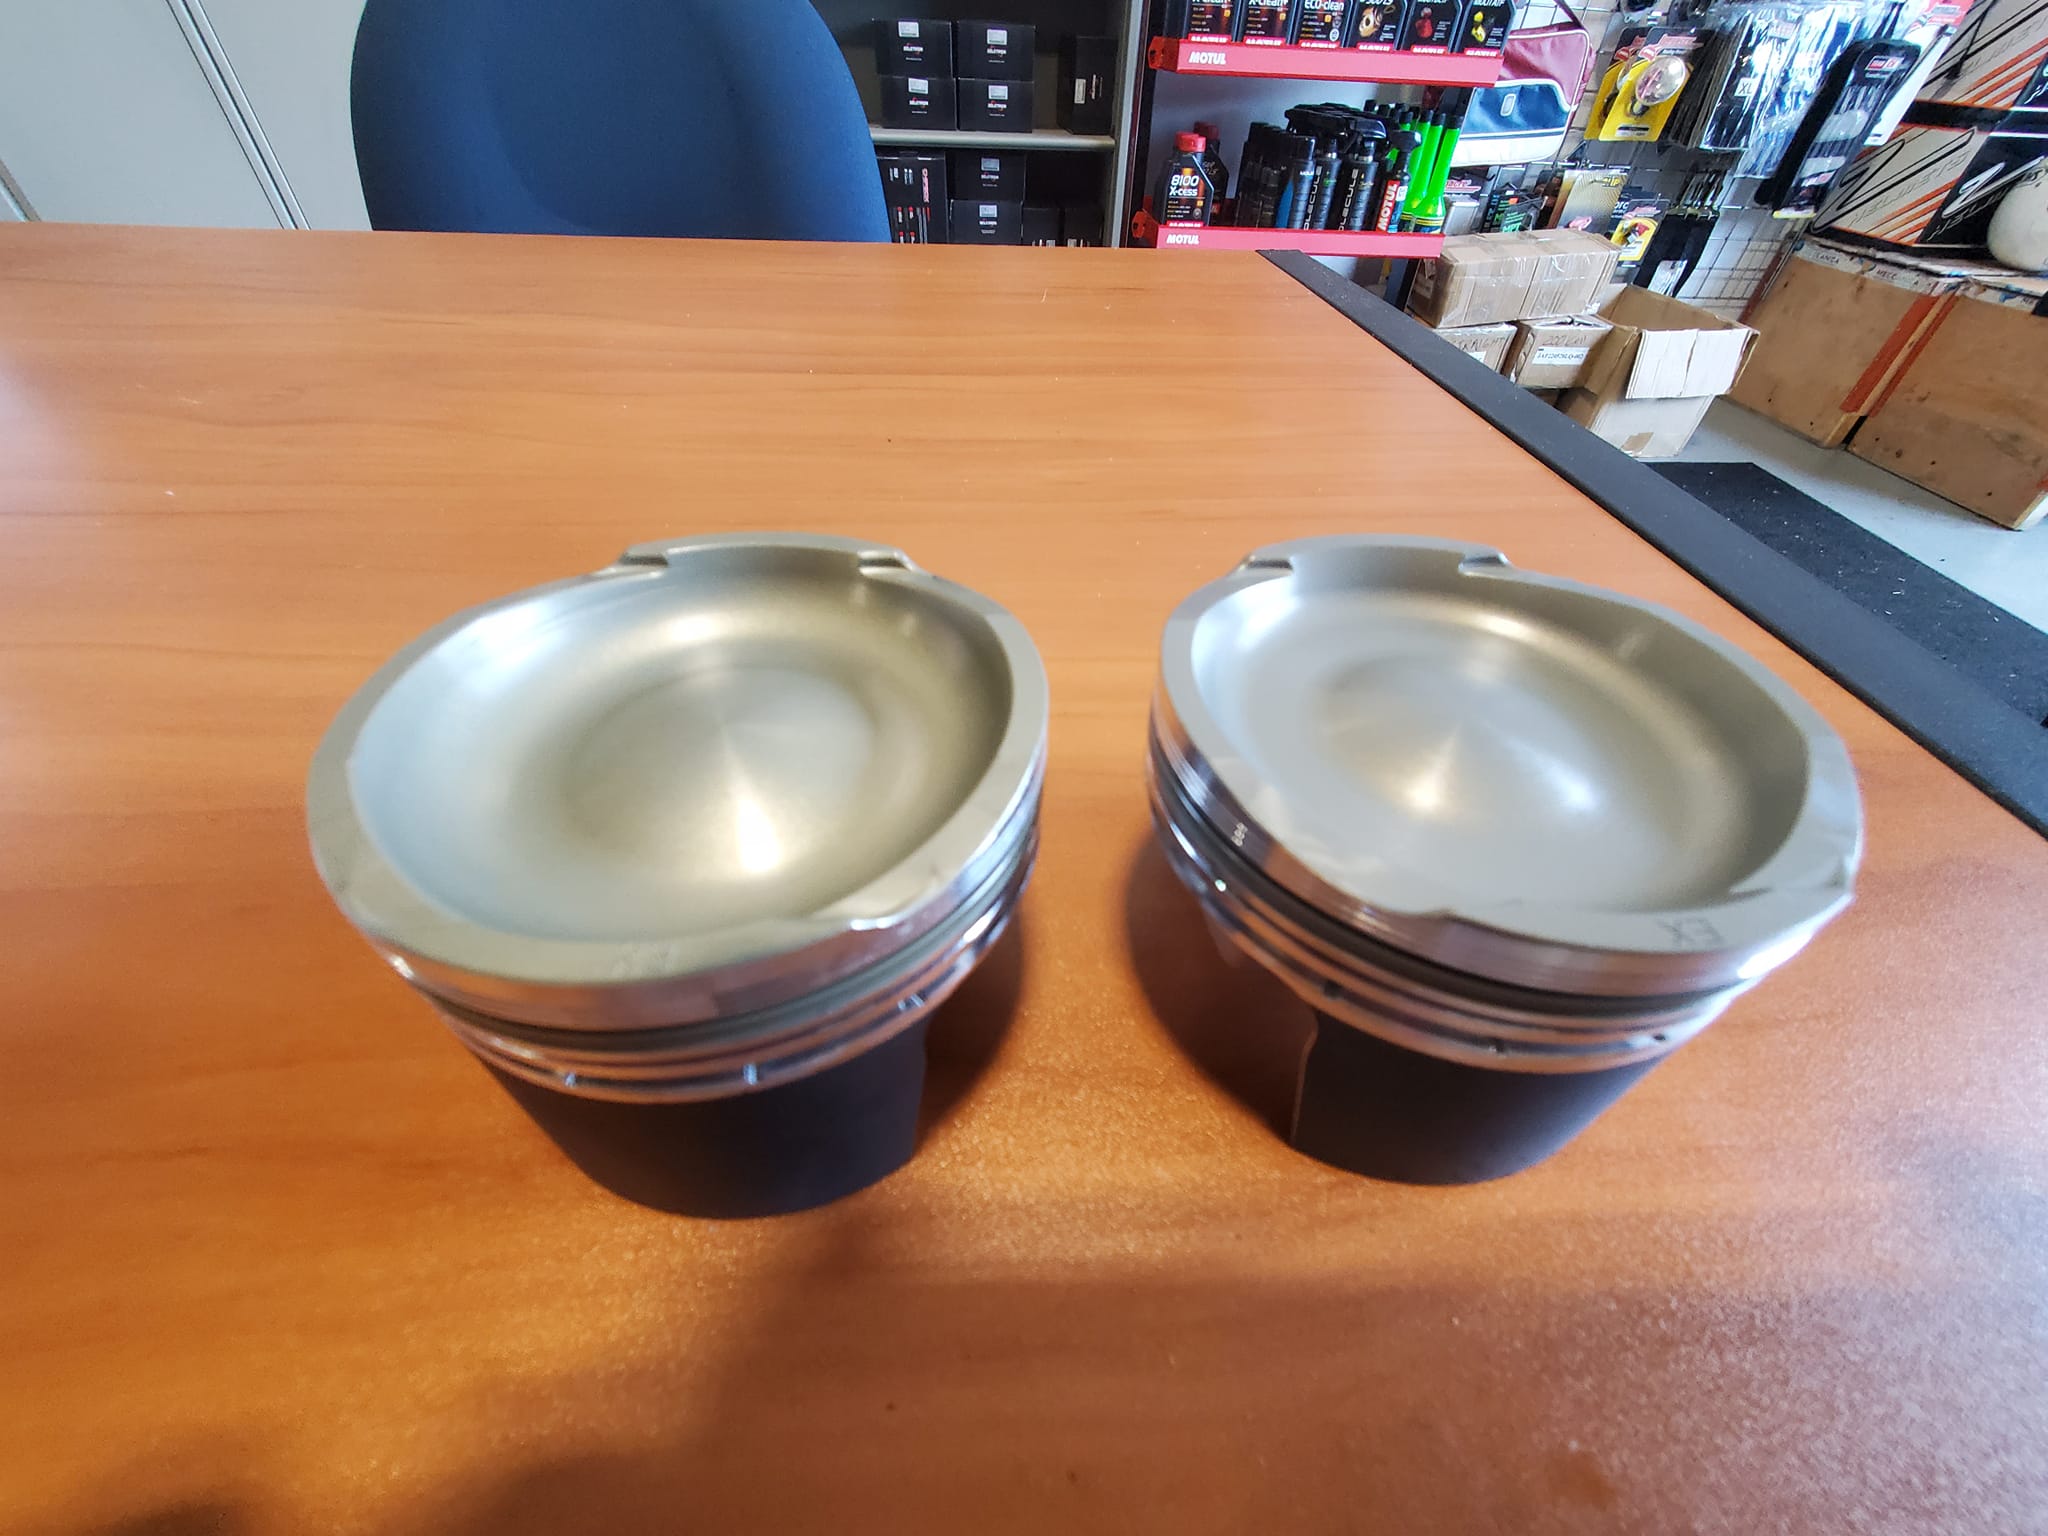 PISTAL RACING Forged forged pistons for 1.4 liter engines